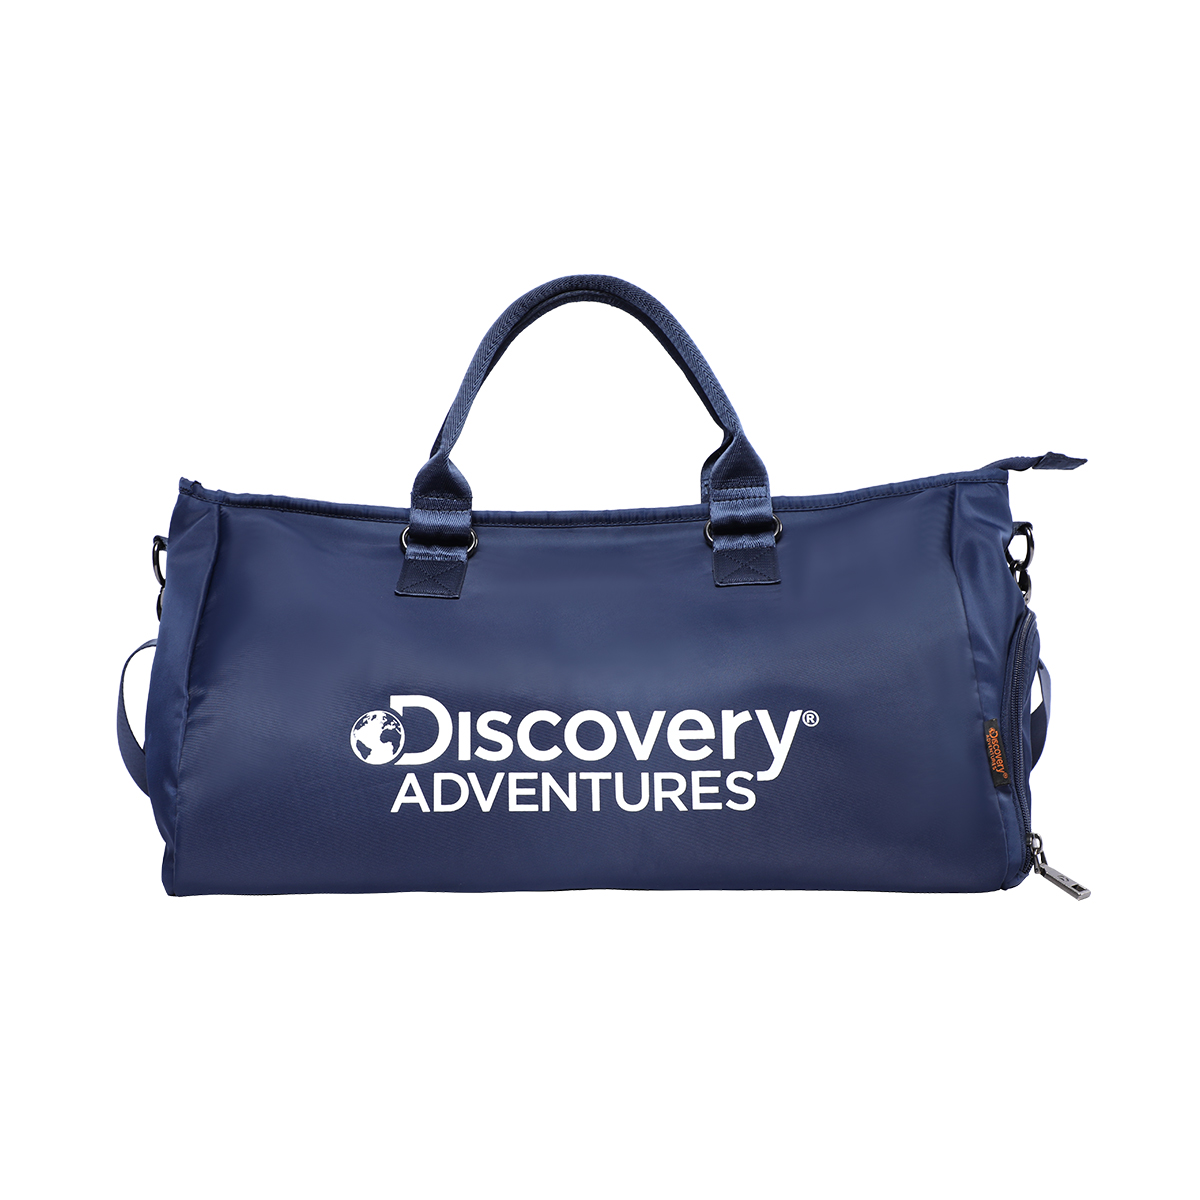 Discovery Adventures Outdoors Waterproof Larger Capacity Travel Bag